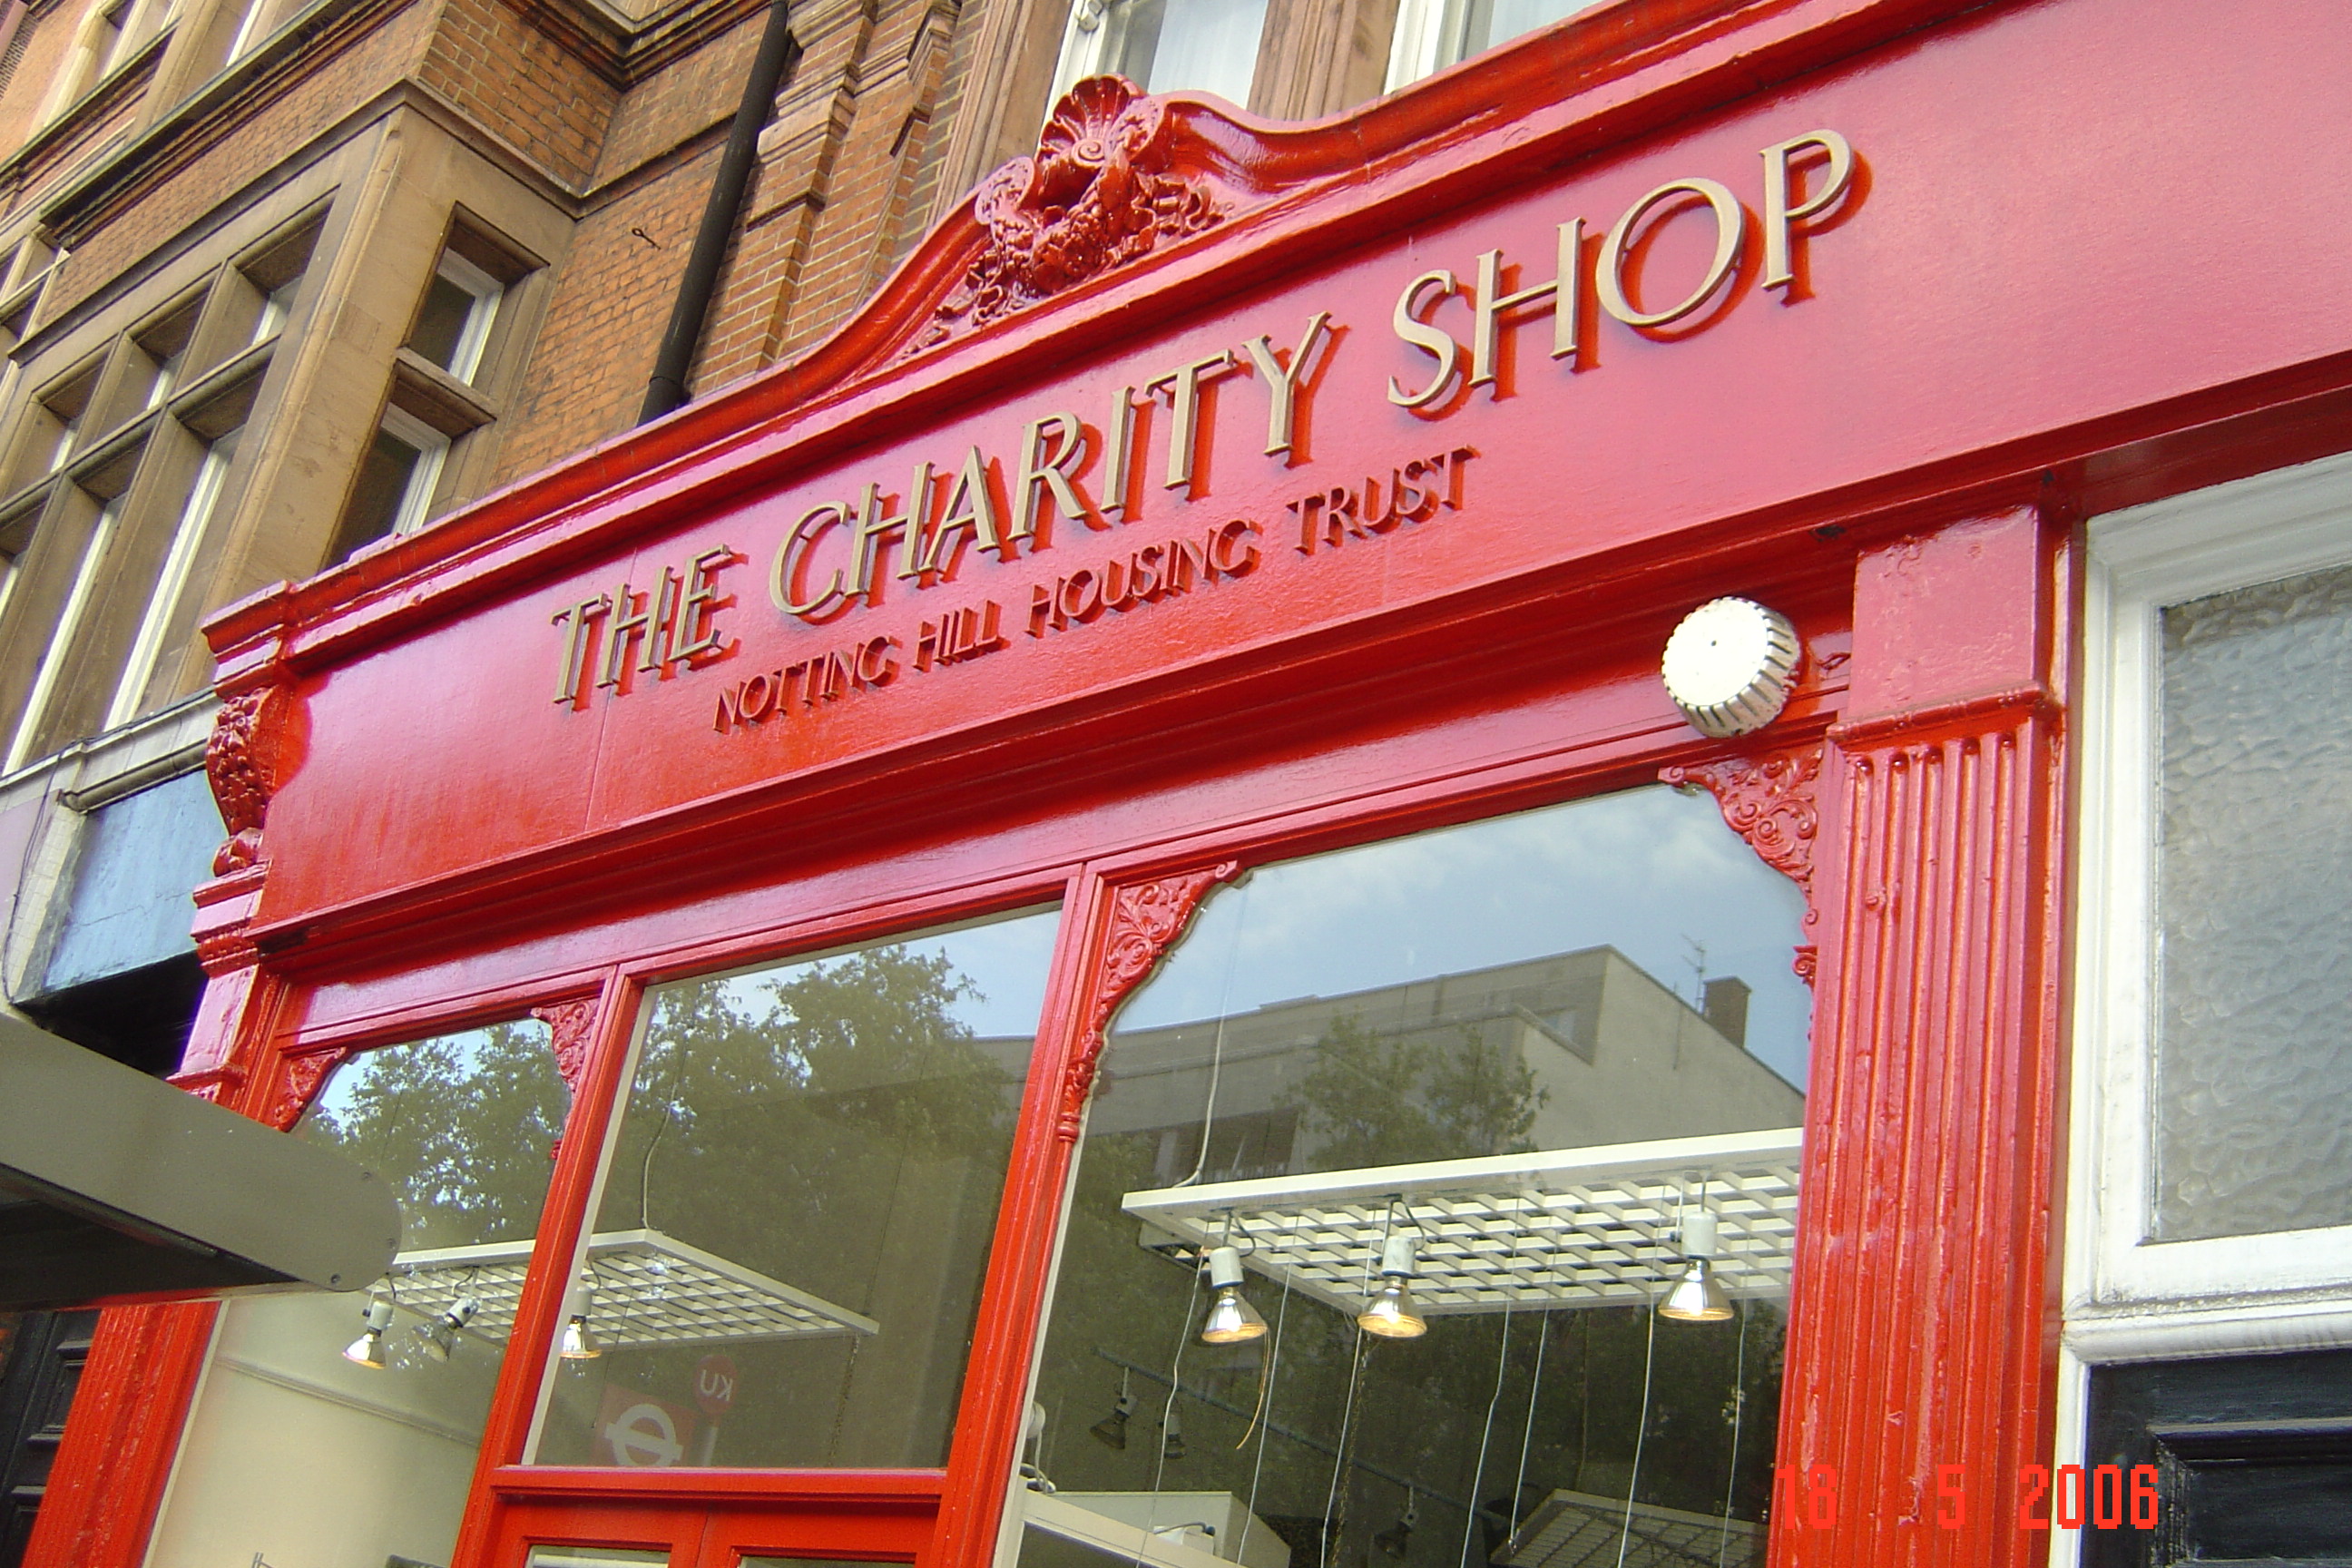 The Charity Shop NHHT Brompton